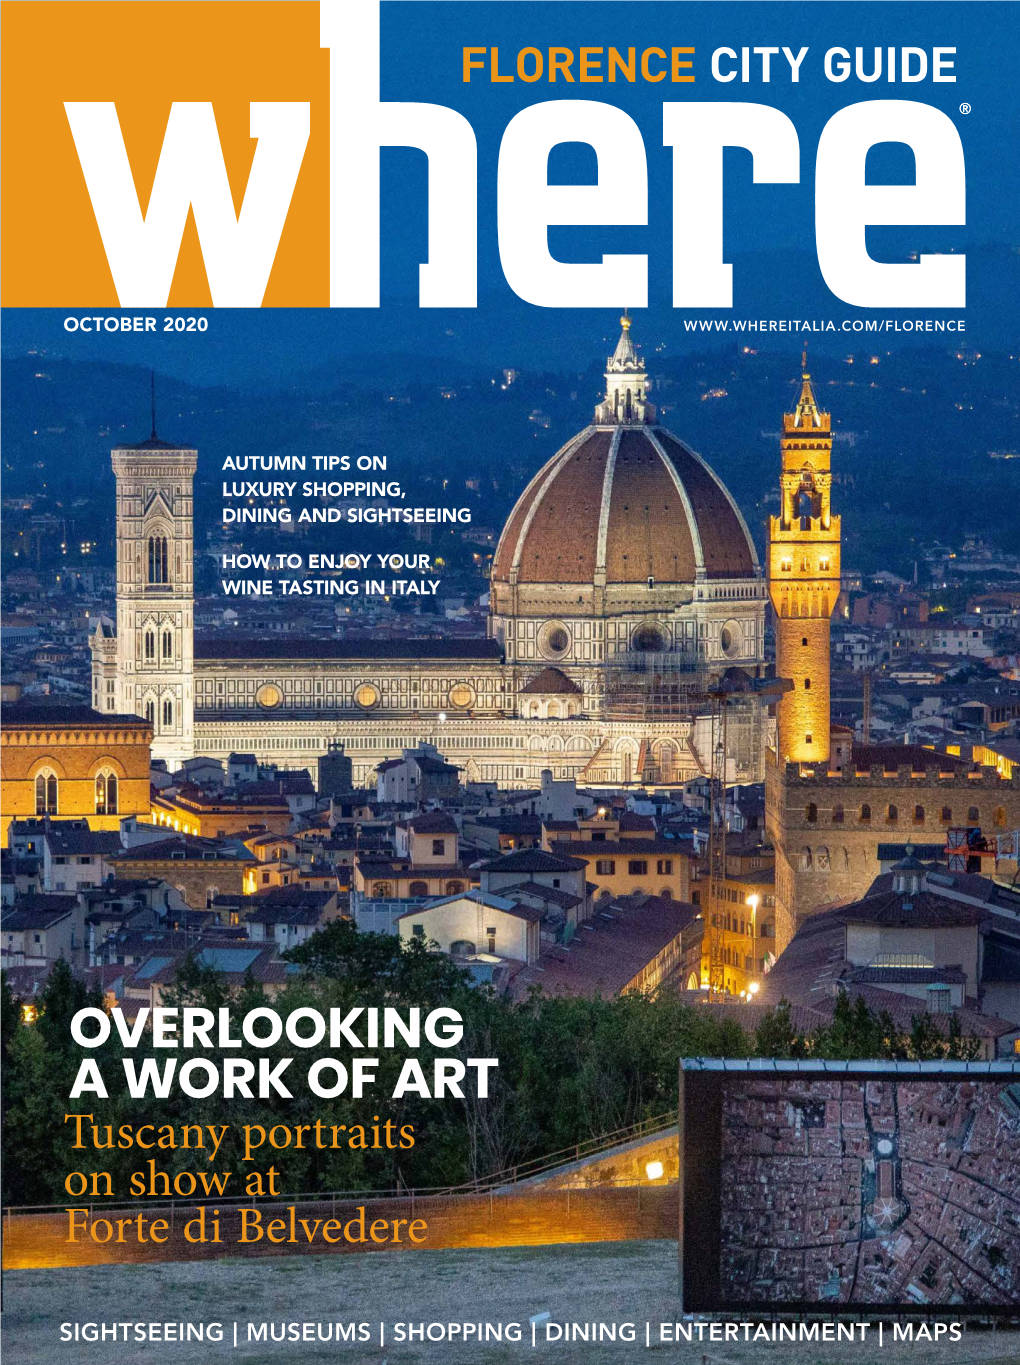 OVERLOOKING a WORK of ART Tuscany Portraits on Show at Forte Di Belvedere